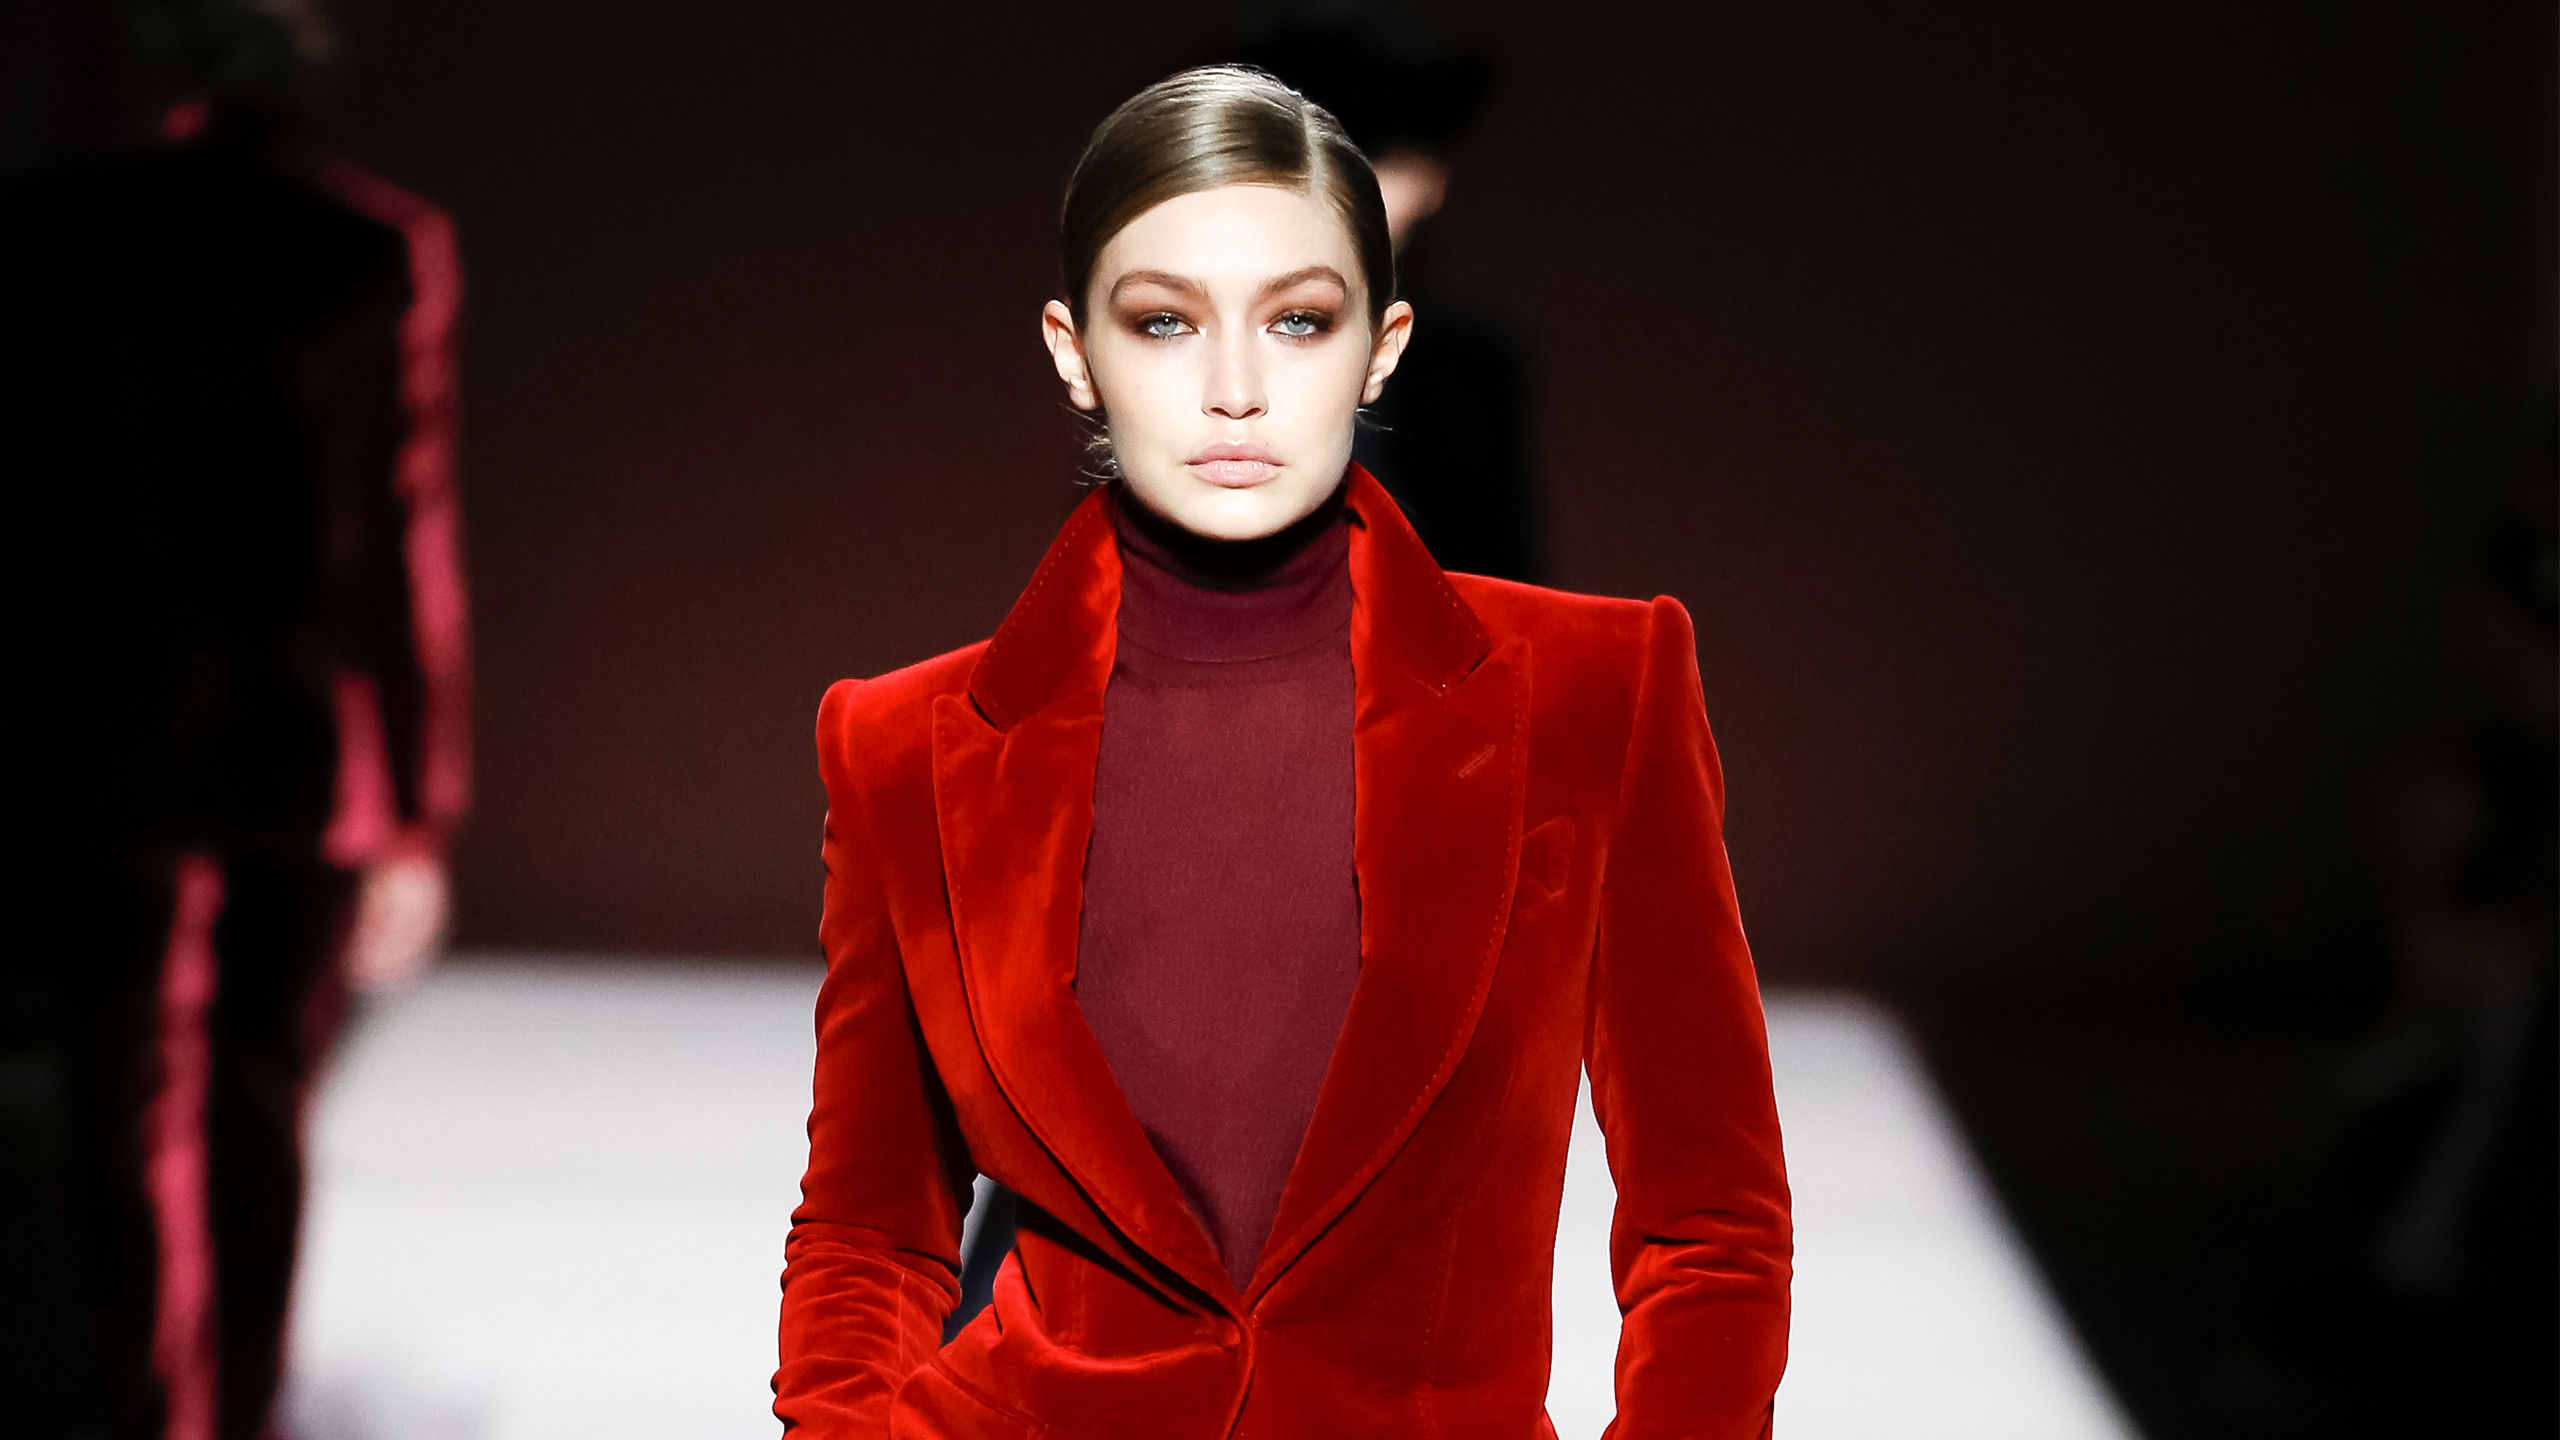 NYFW highlights, silver’s spotlight at the Grammys, and more fashion news